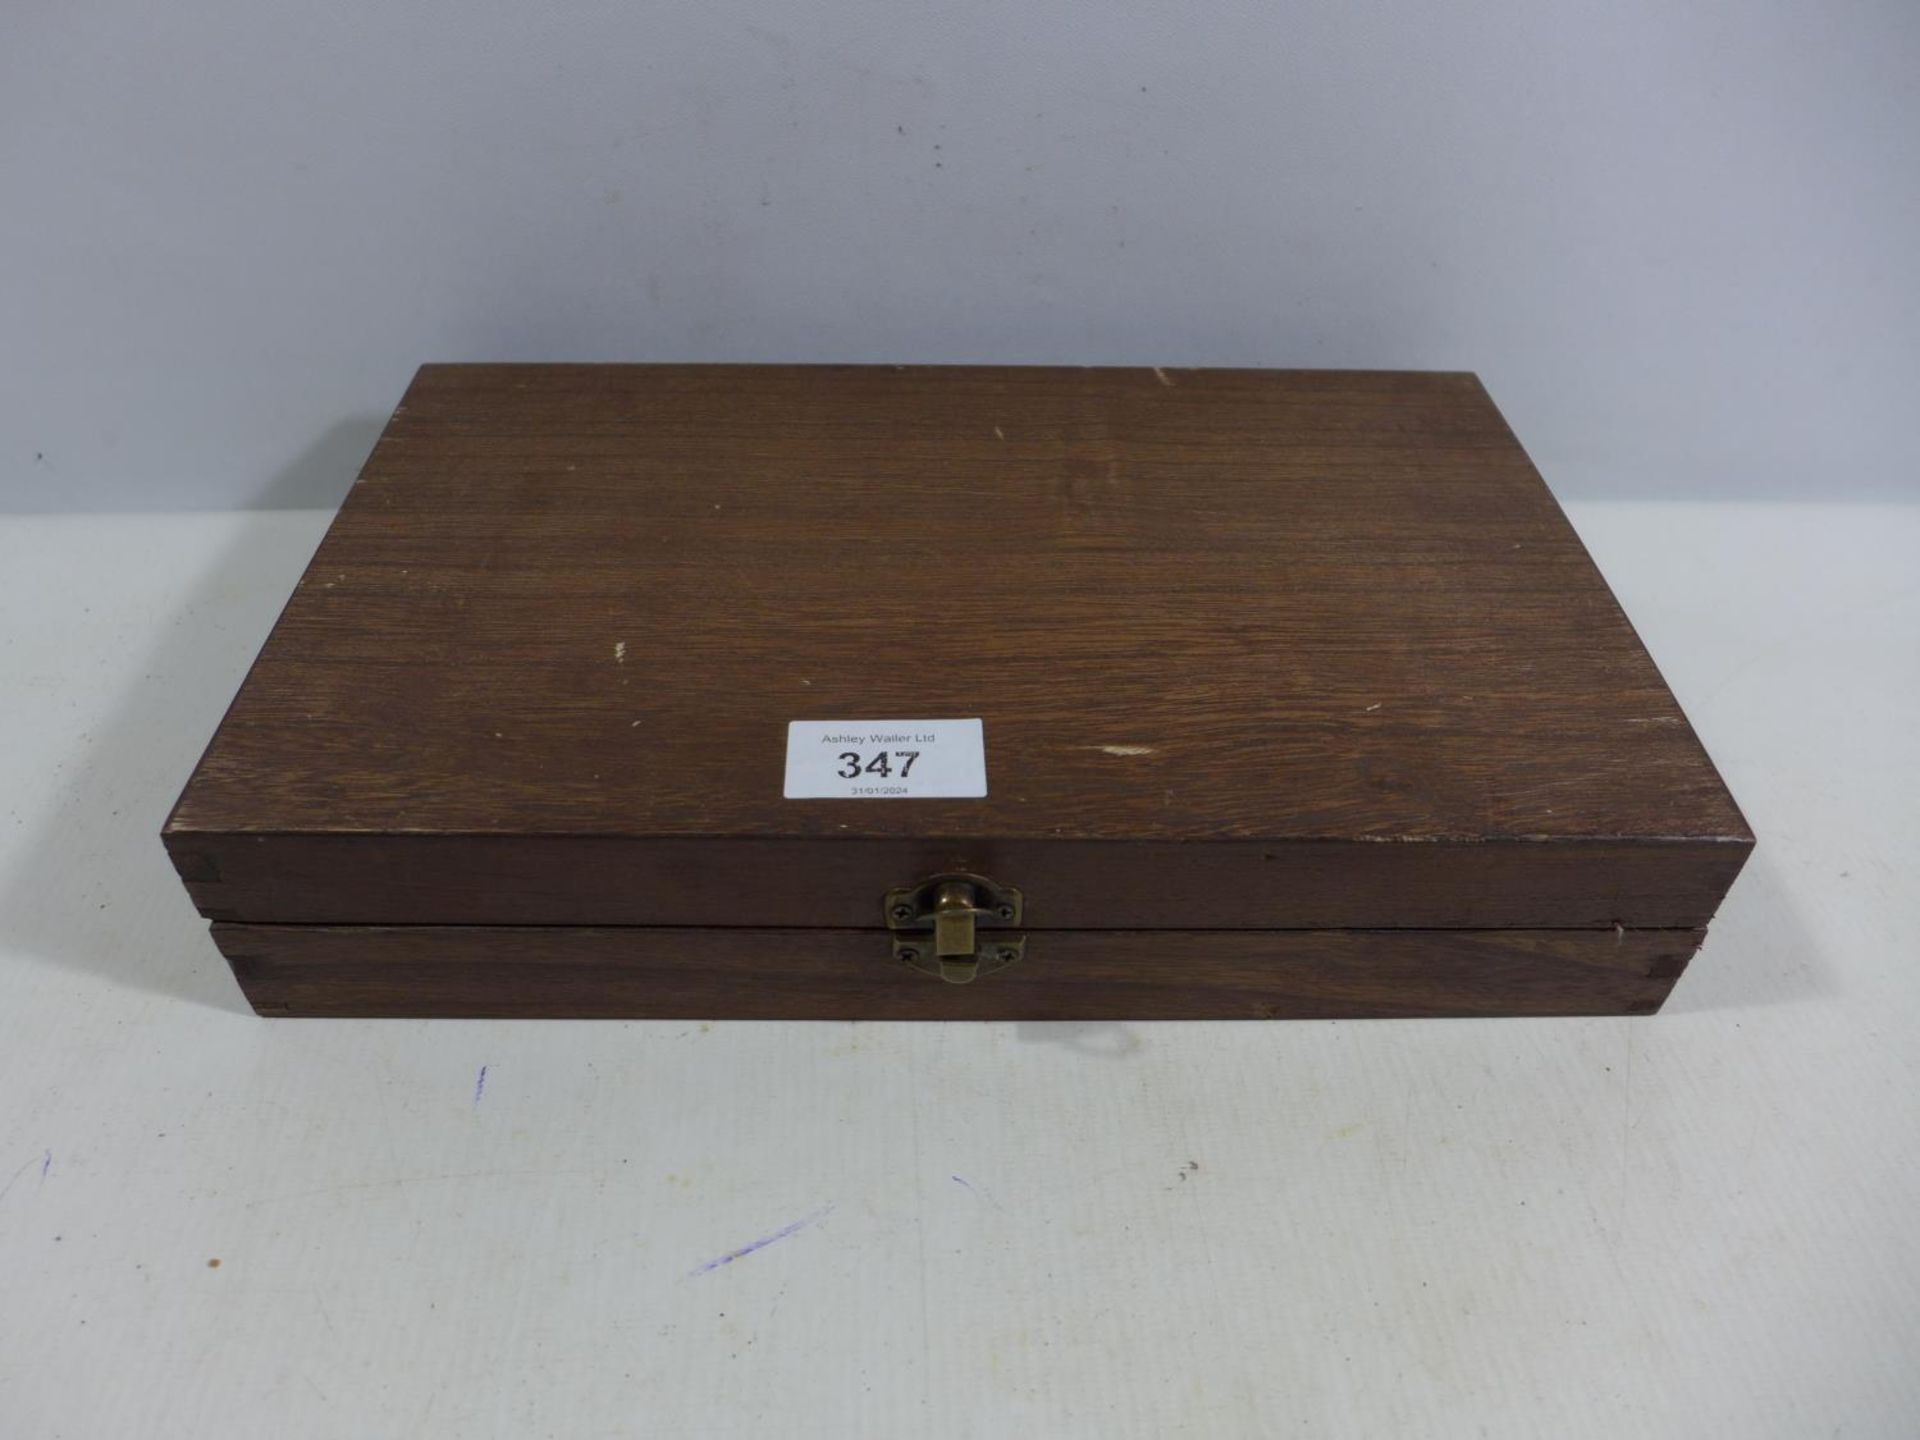 A WOODEN BOX FITTED OUT FOR A 28CM WIDE PISTOL, WIDTH OF BOX 30CM, DEPTH 18CM, HEIGHT 6CM - Image 4 of 4